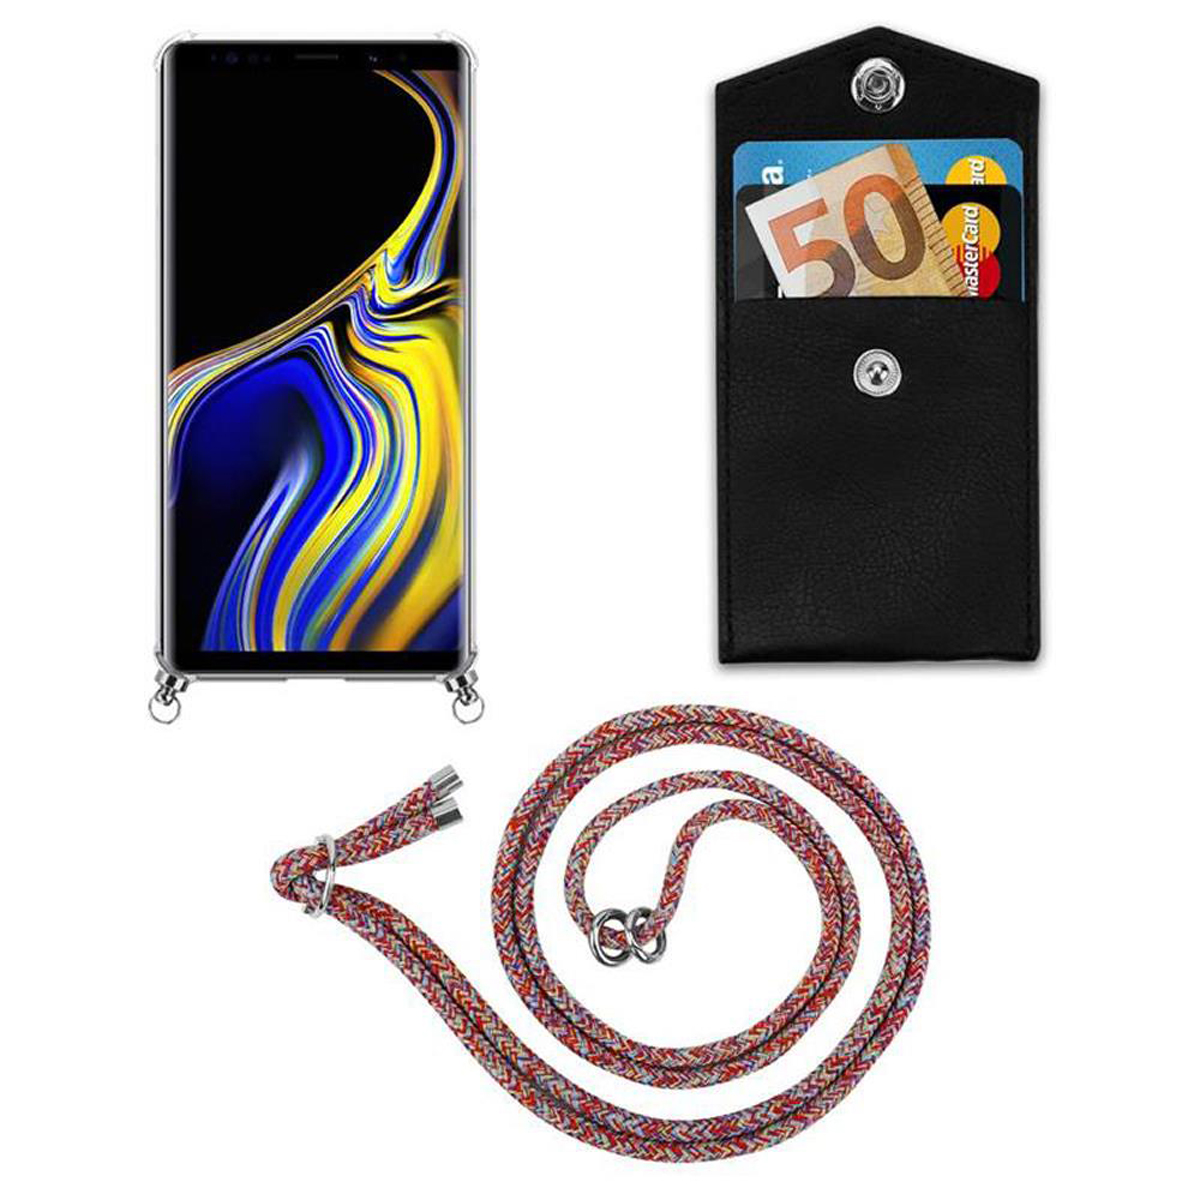 CADORABO Handy Kette mit Ringen, abnehmbarer Samsung, Hülle, Band Kordel 9, COLORFUL Galaxy PARROT und Backcover, NOTE Silber